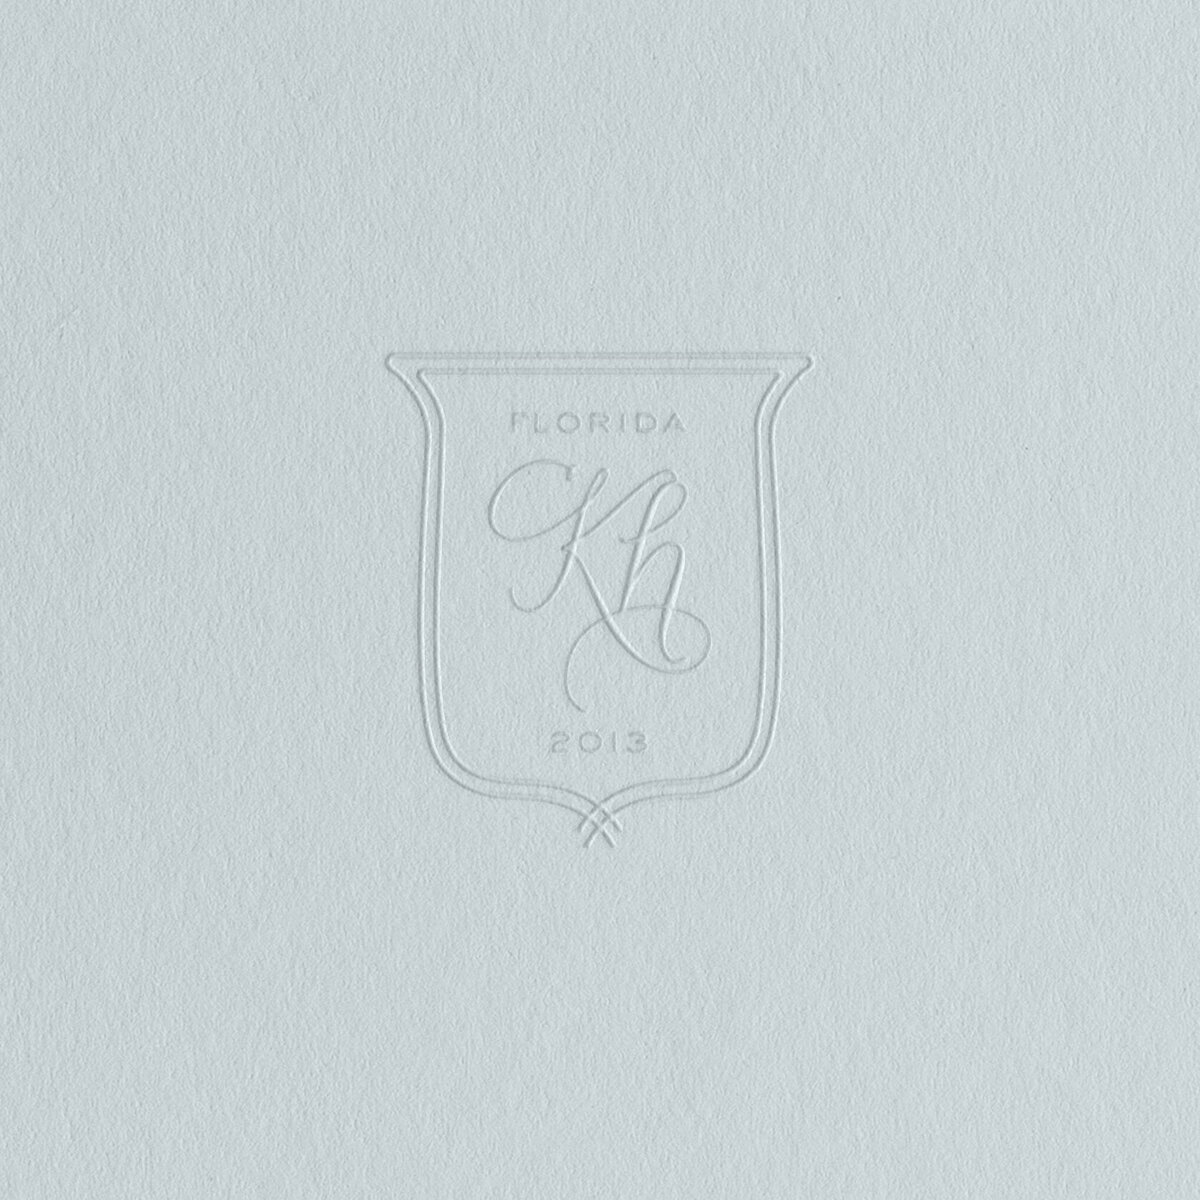 a timeless crest logo embossed on blue paper